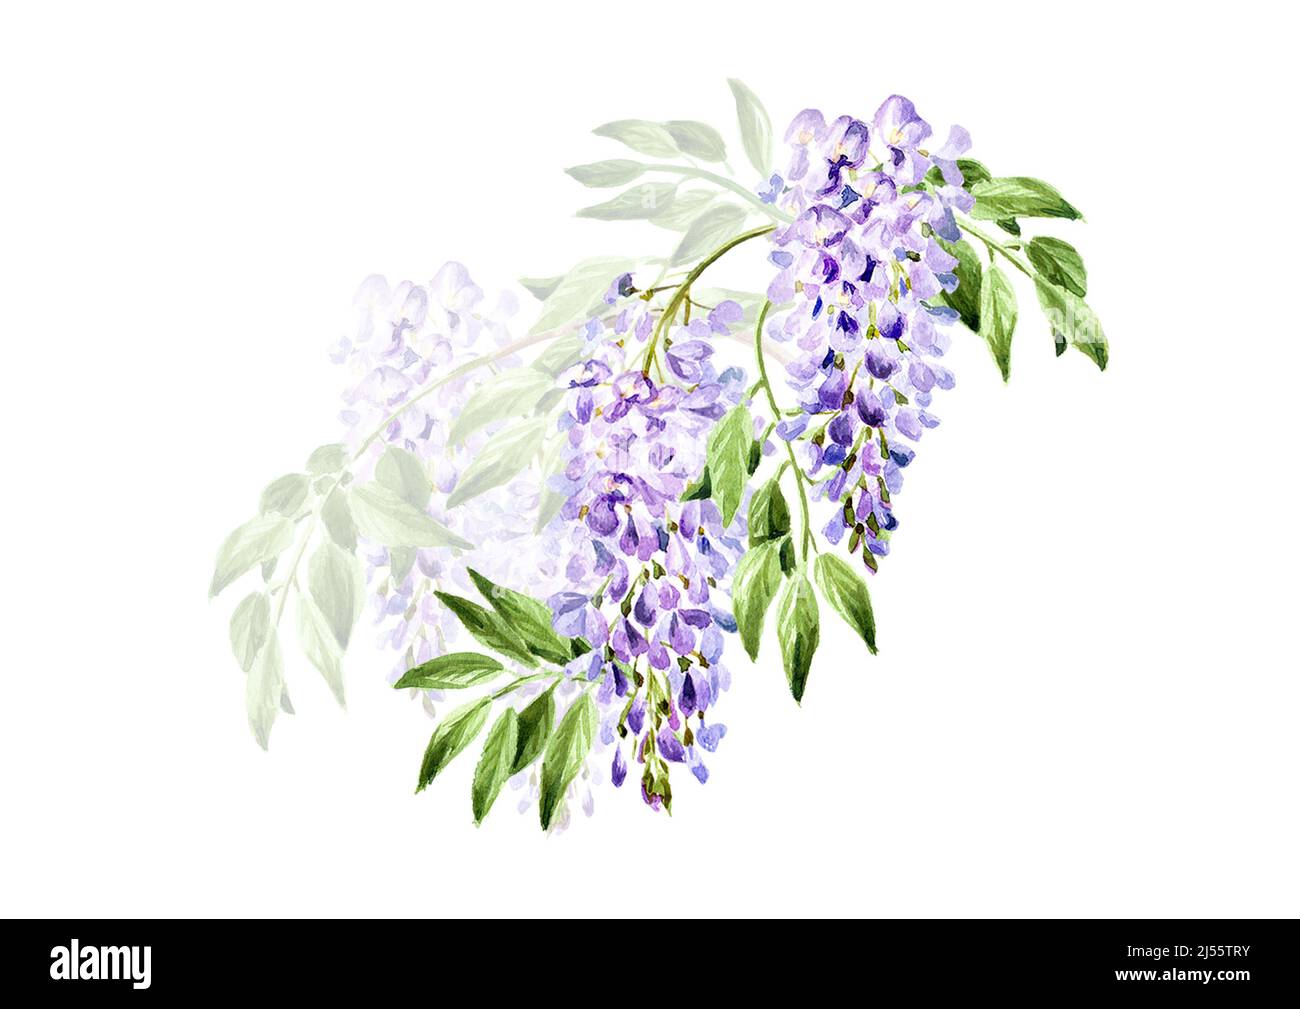 Wisteria flower, save the date card element. Hand drawn watercolor,  illustration isolated on white background Stock Photo